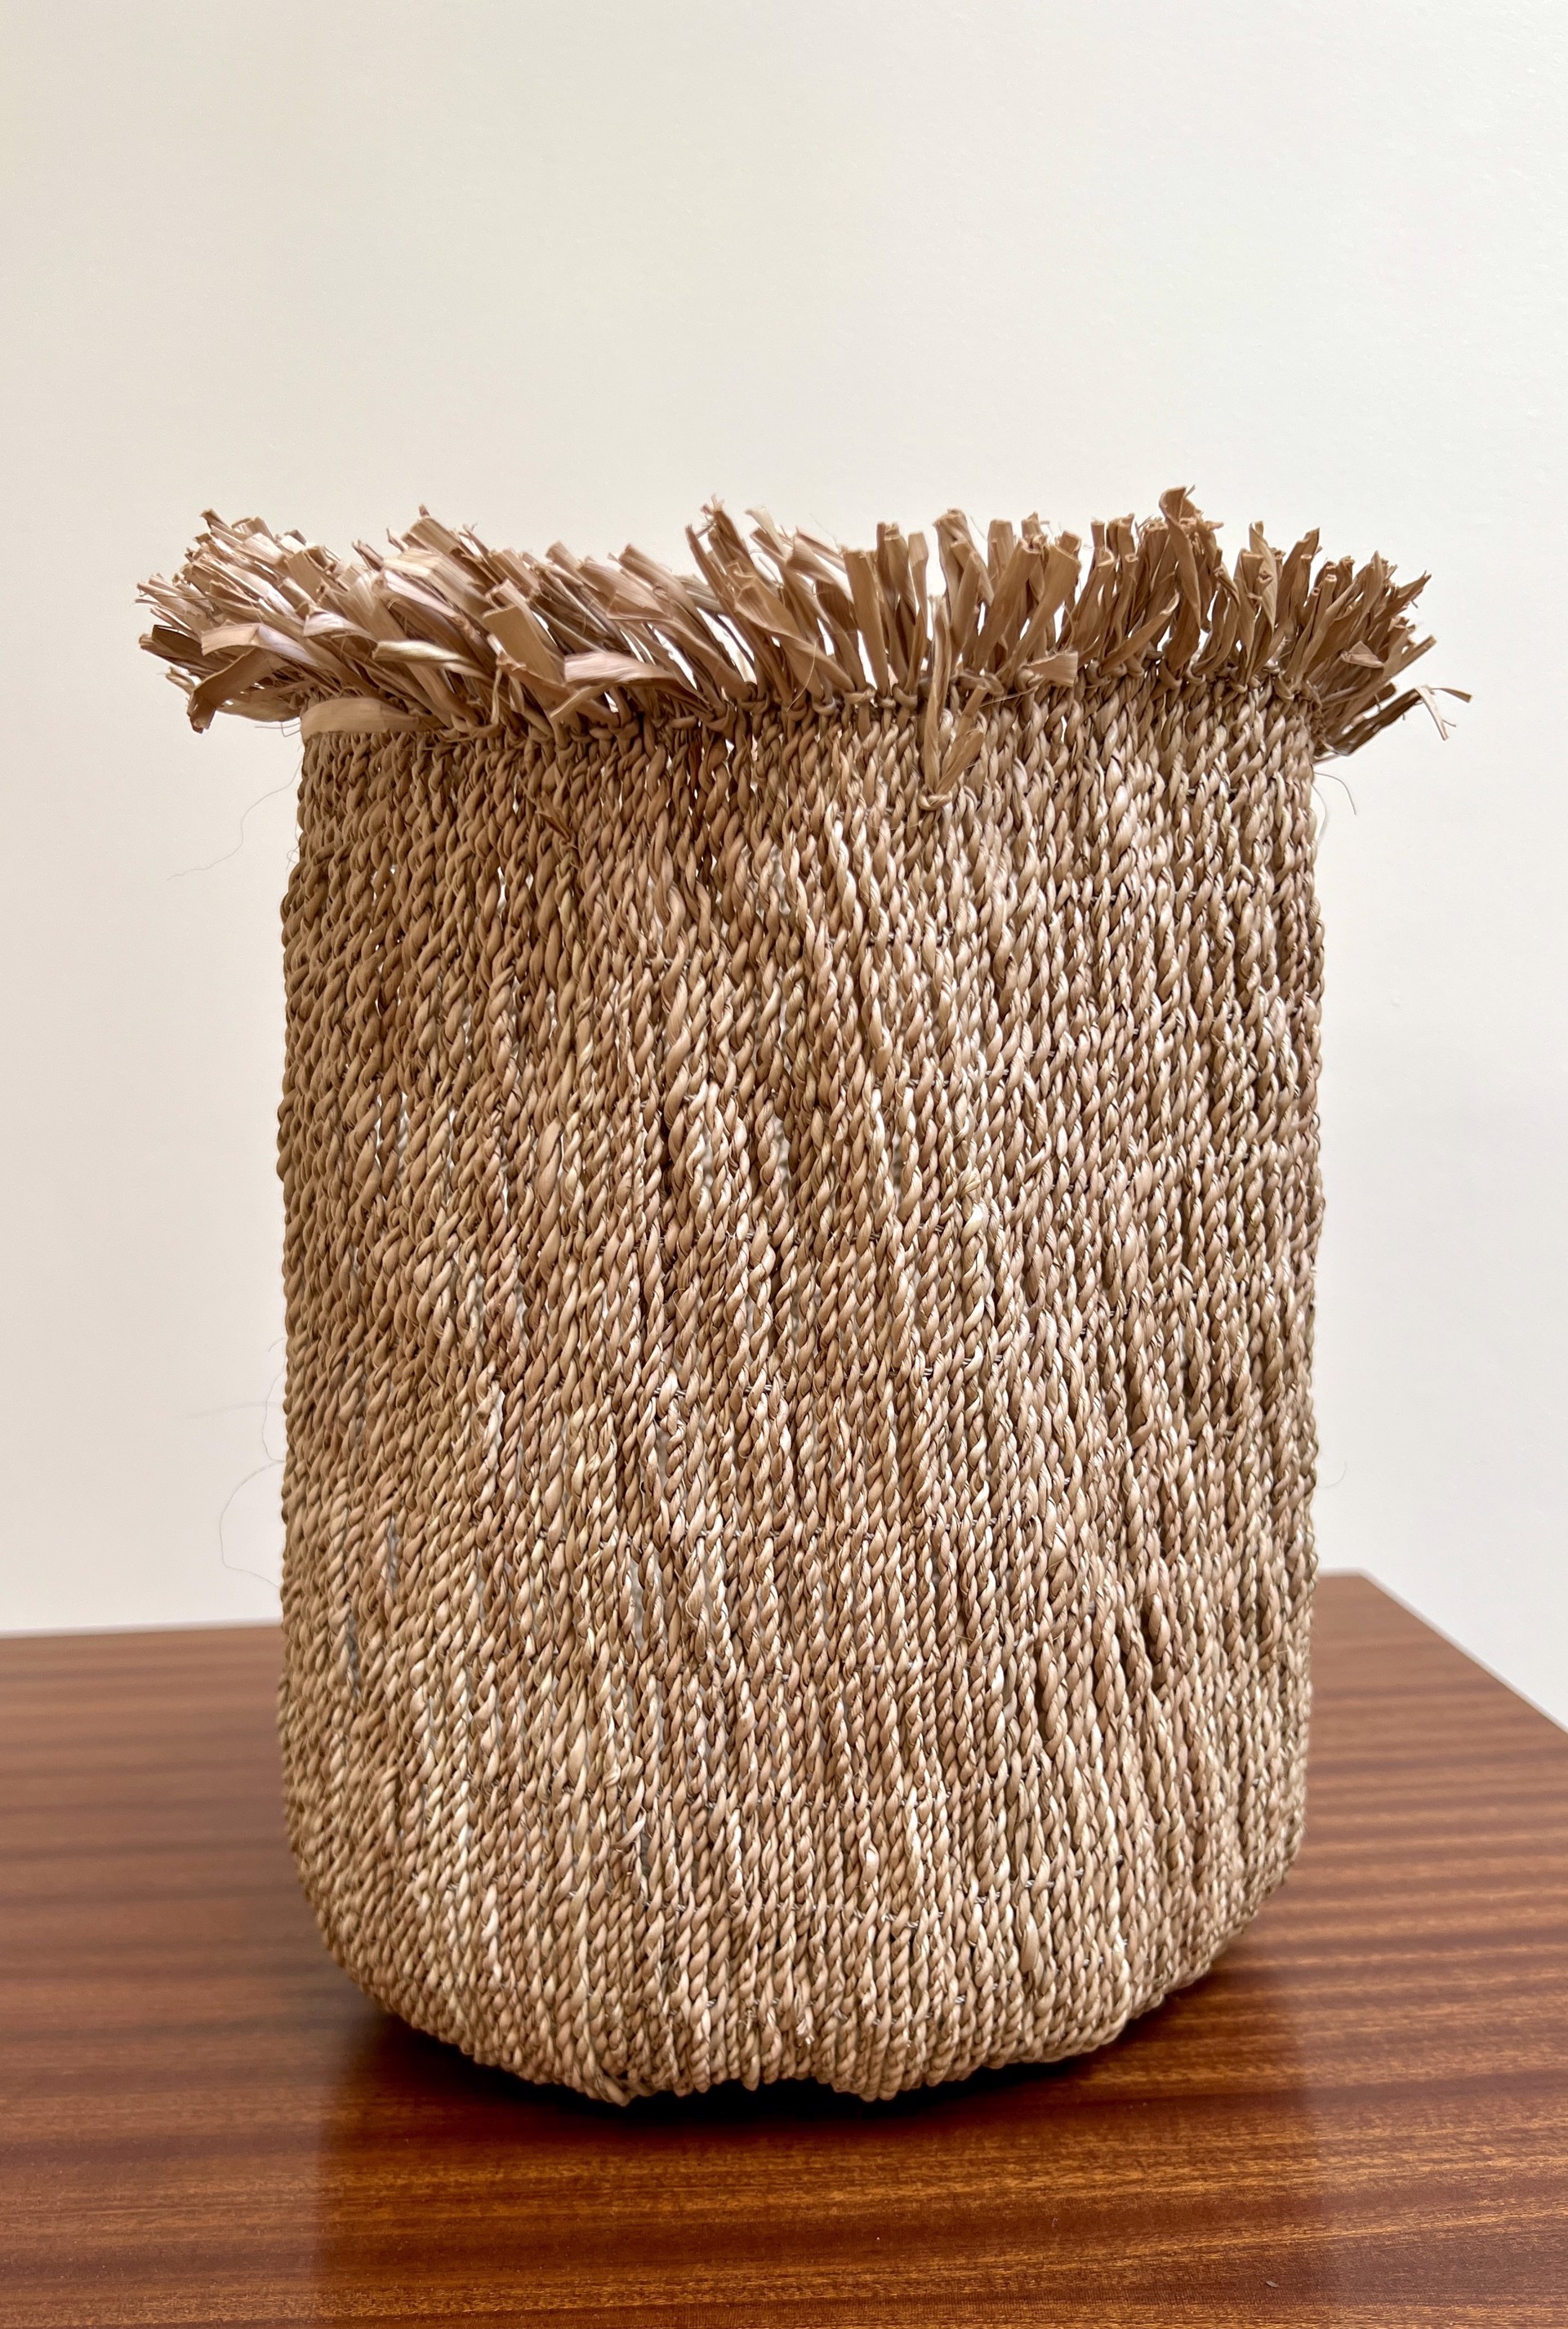 Straw Beer Basket 4 by Omba Arts